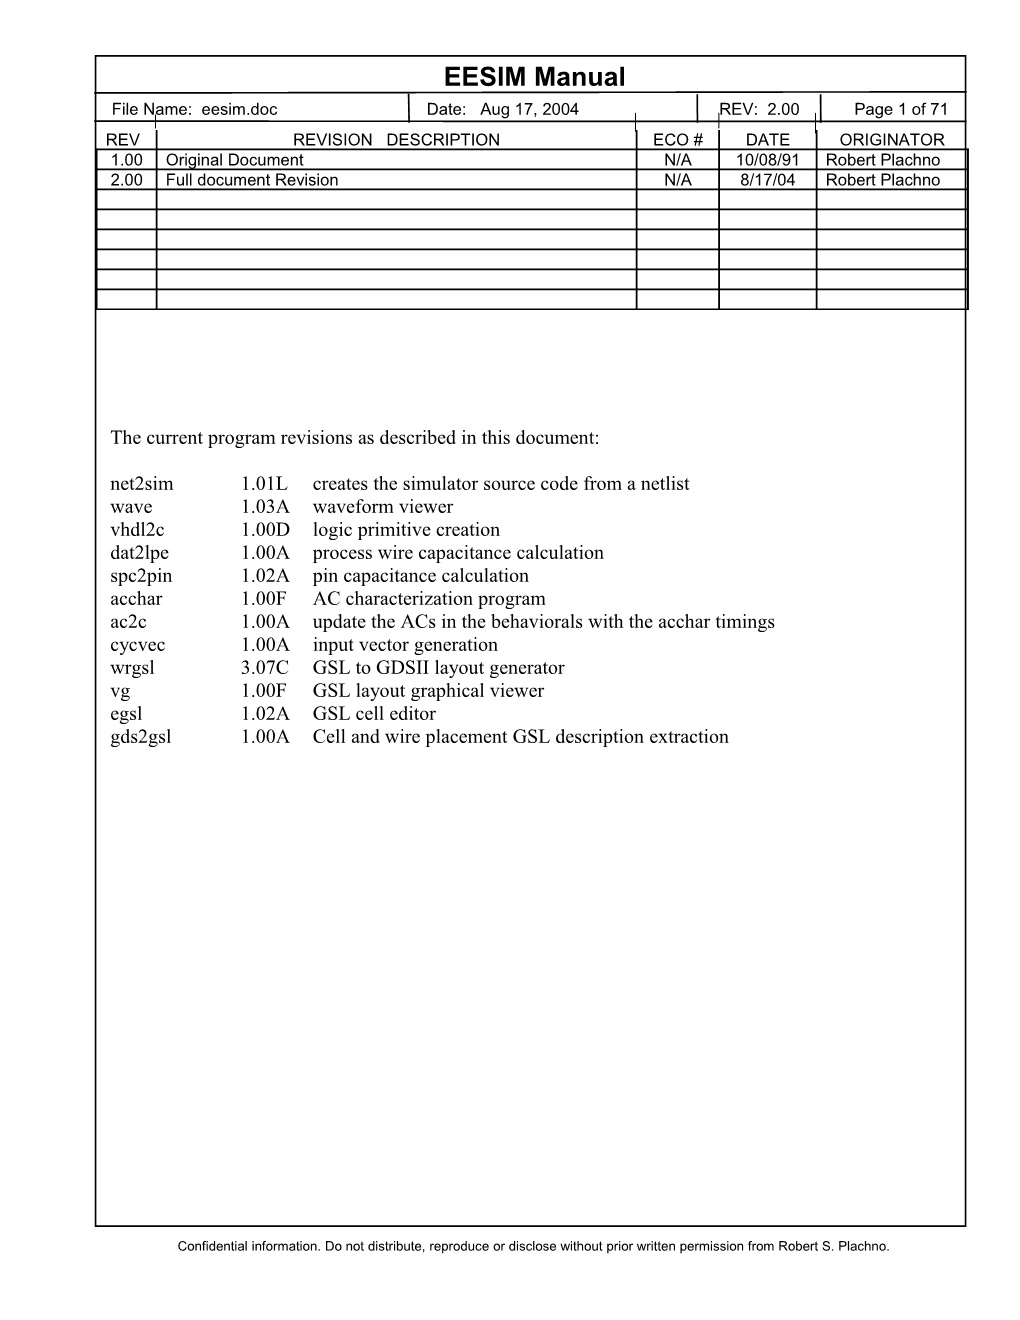 The Current Program Revisions As Described in This Document